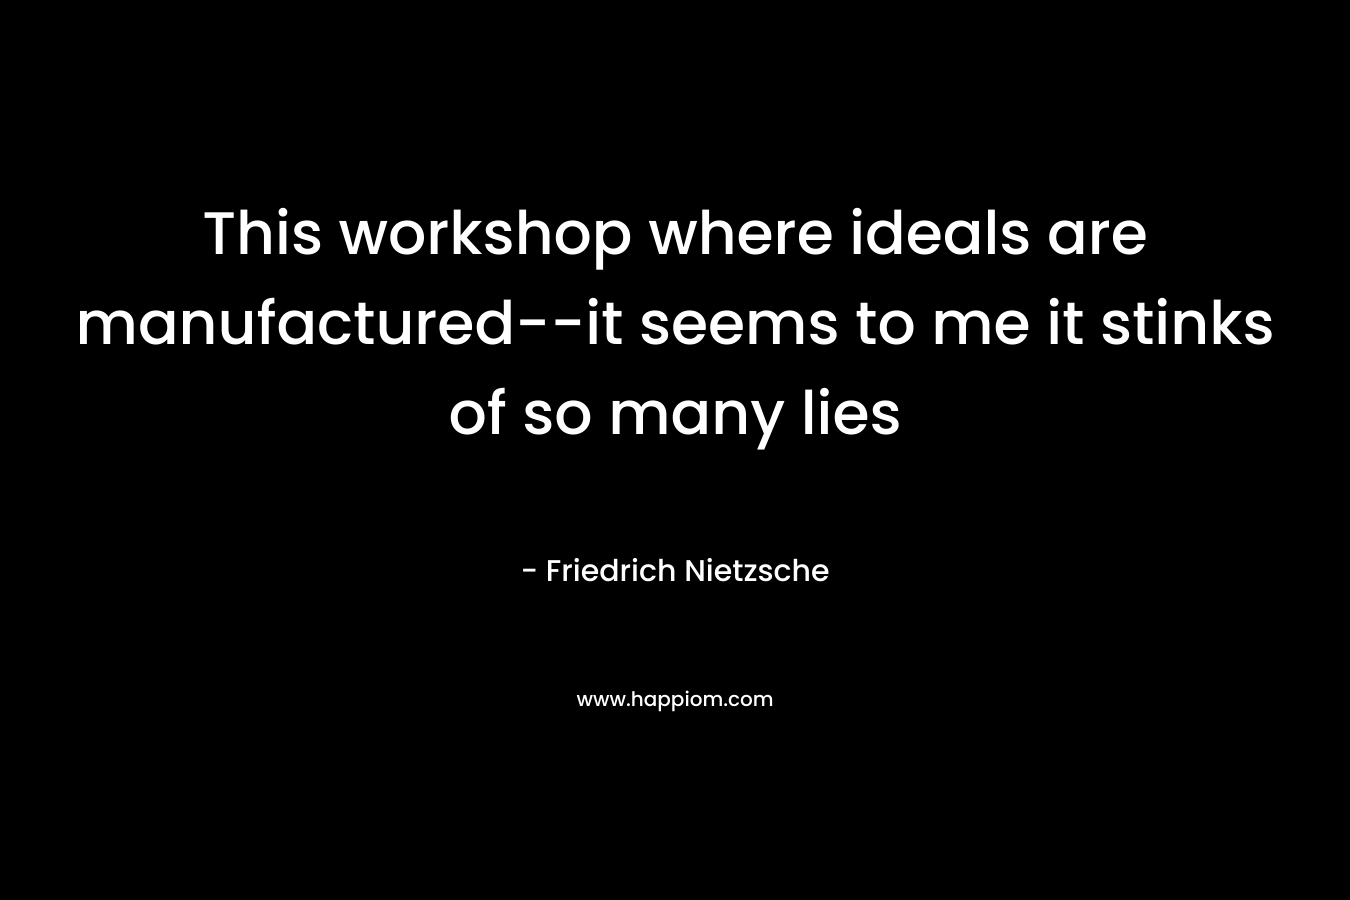 This workshop where ideals are manufactured--it seems to me it stinks of so many lies